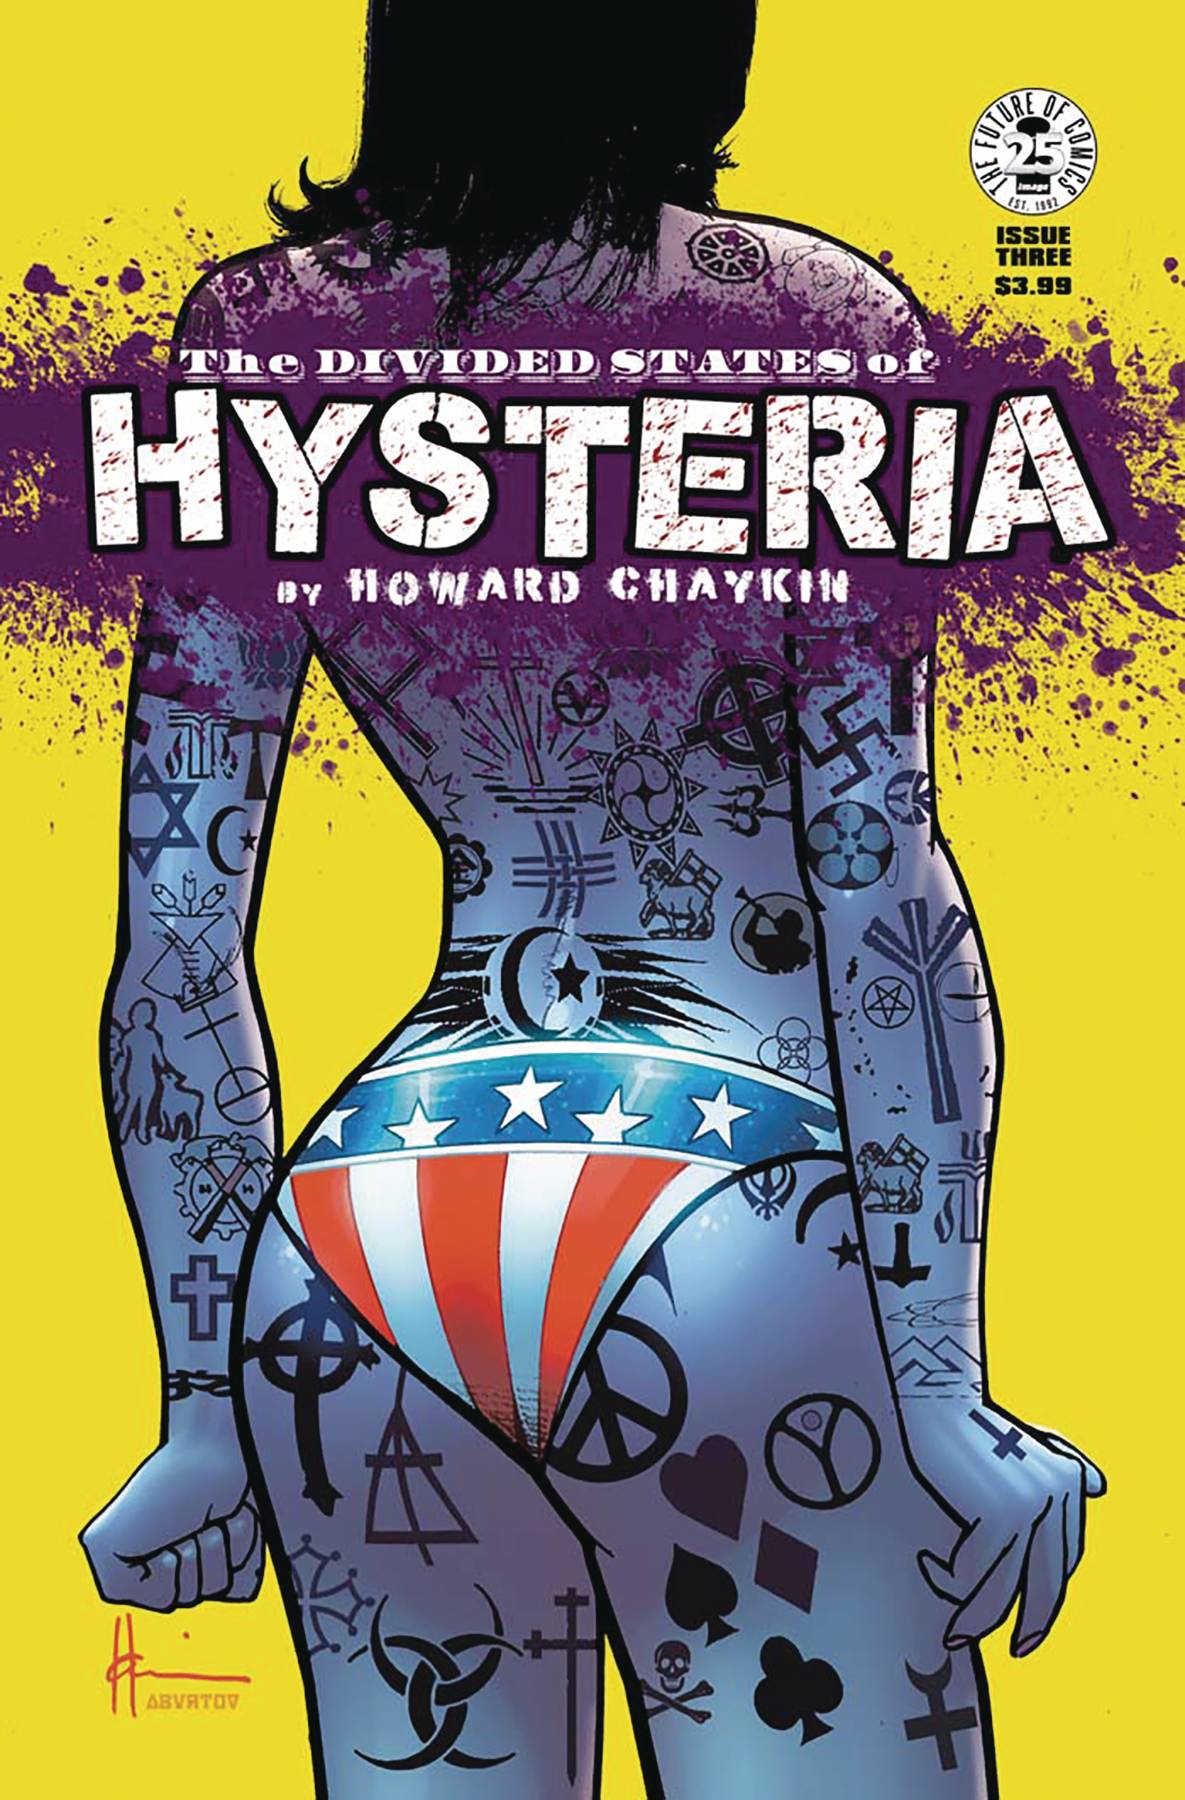 DIVIDED STATES OF HYSTERIA#3